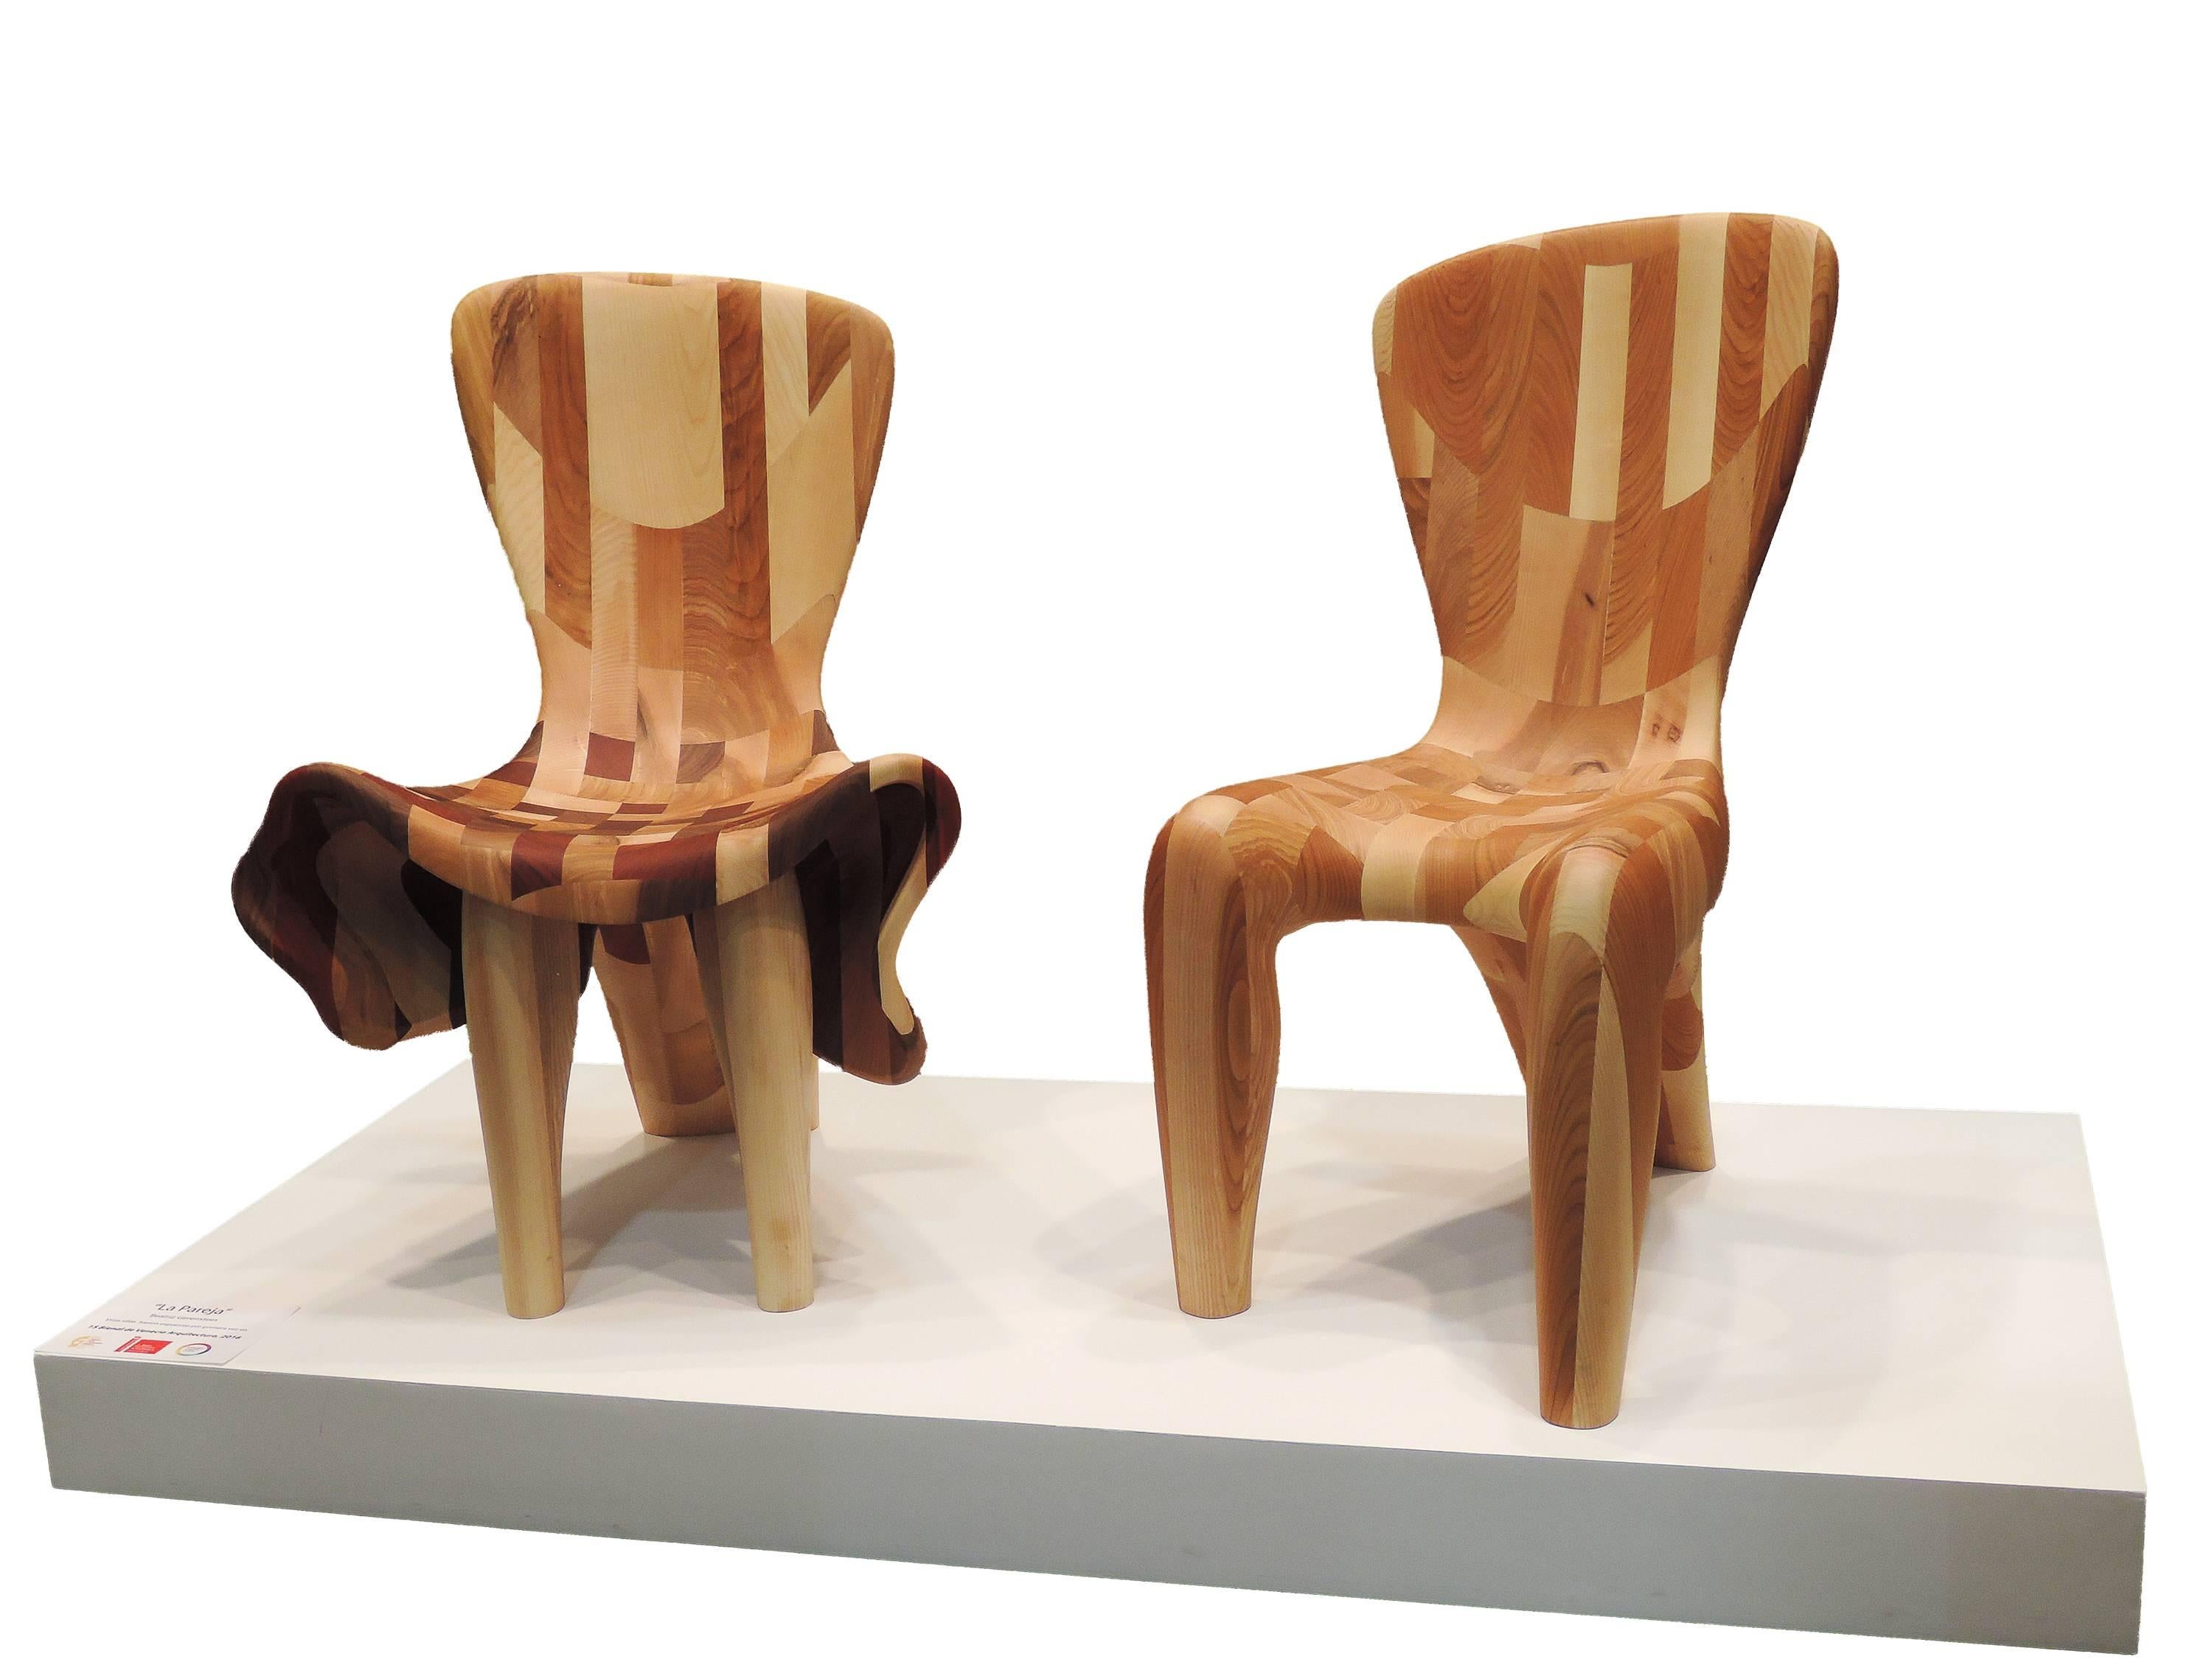 Beatriz Gerenstein Abstract Sculpture - The Chairs in Love. Chairs Sculpture shown in 15Venice Architecture Biennale